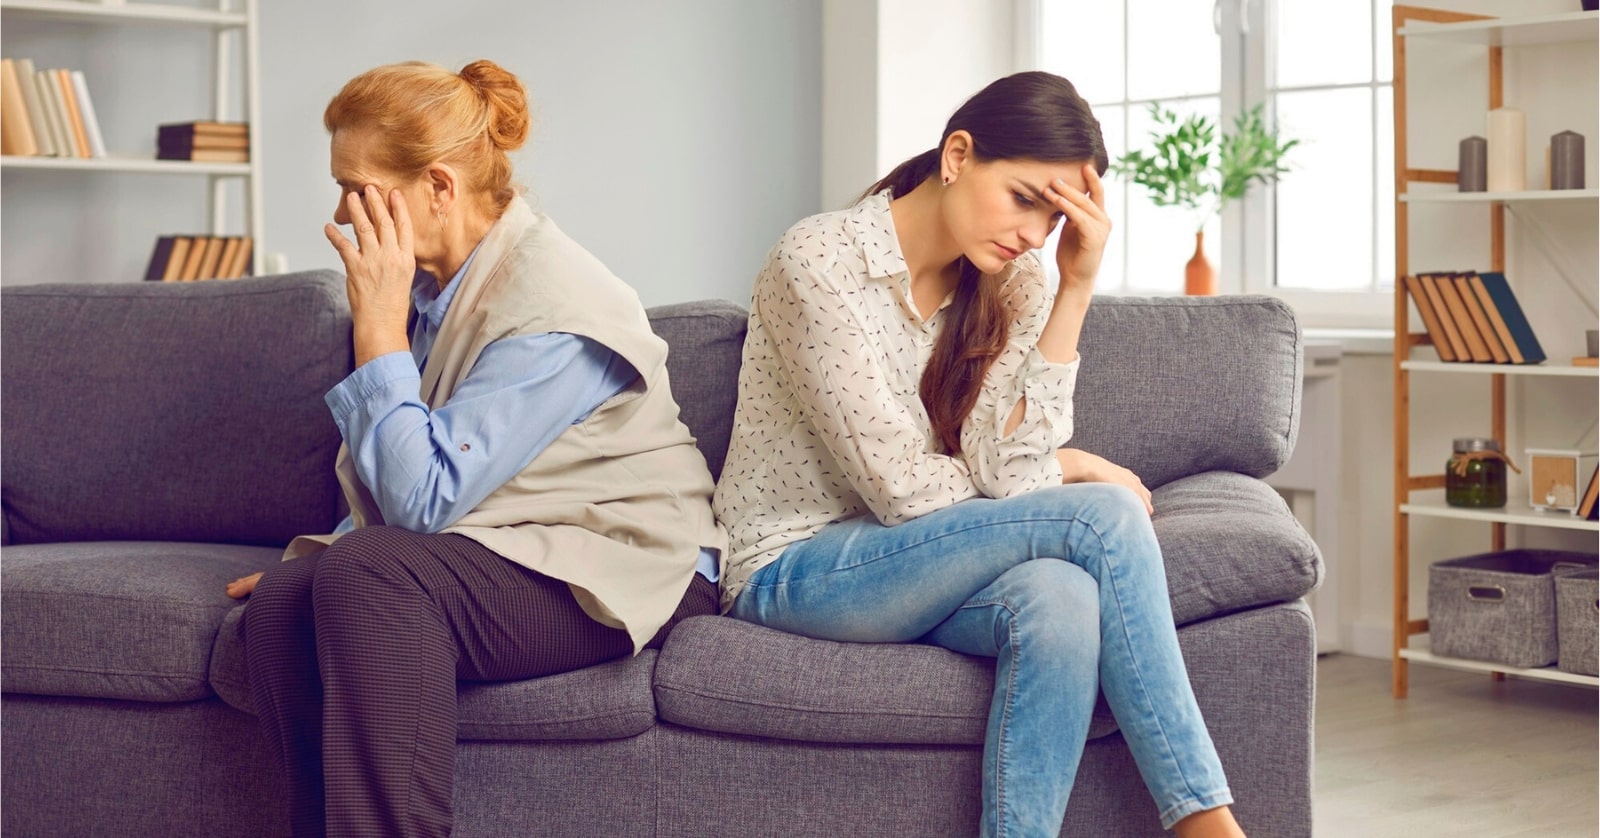 mother and grown daughter sitting on couch facing away from each other illustrating conflict